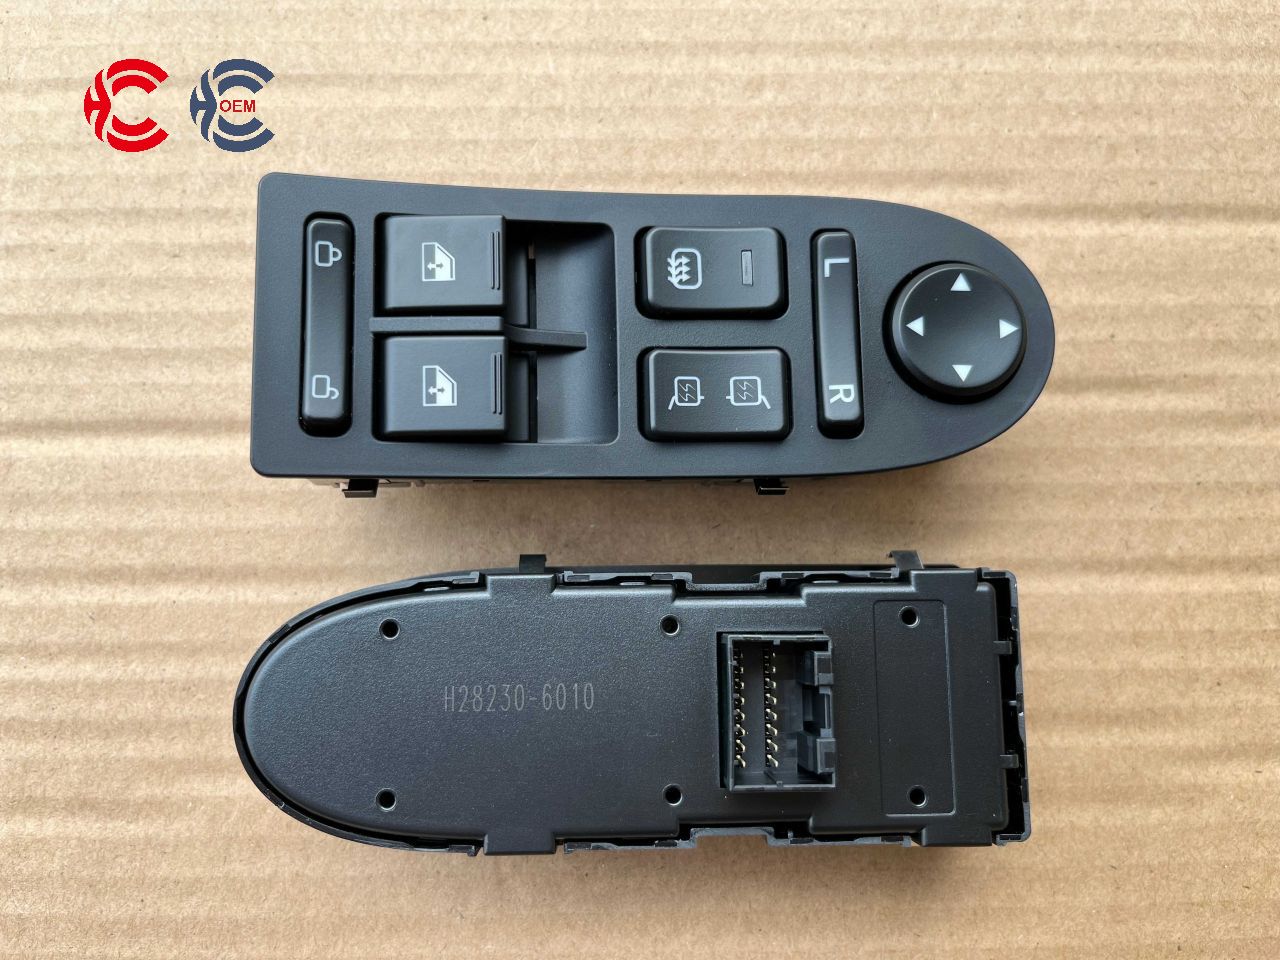 OEM: 812W28230-6010 LeftMaterial: ABS MetalColor: Black SilverOrigin: Made in ChinaWeight: 200gPacking List: 1* Glass Regulator Switch More ServiceWe can provide OEM Manufacturing serviceWe can Be your one-step solution for Auto PartsWe can provide technical scheme for you Feel Free to Contact Us, We will get back to you as soon as possible.